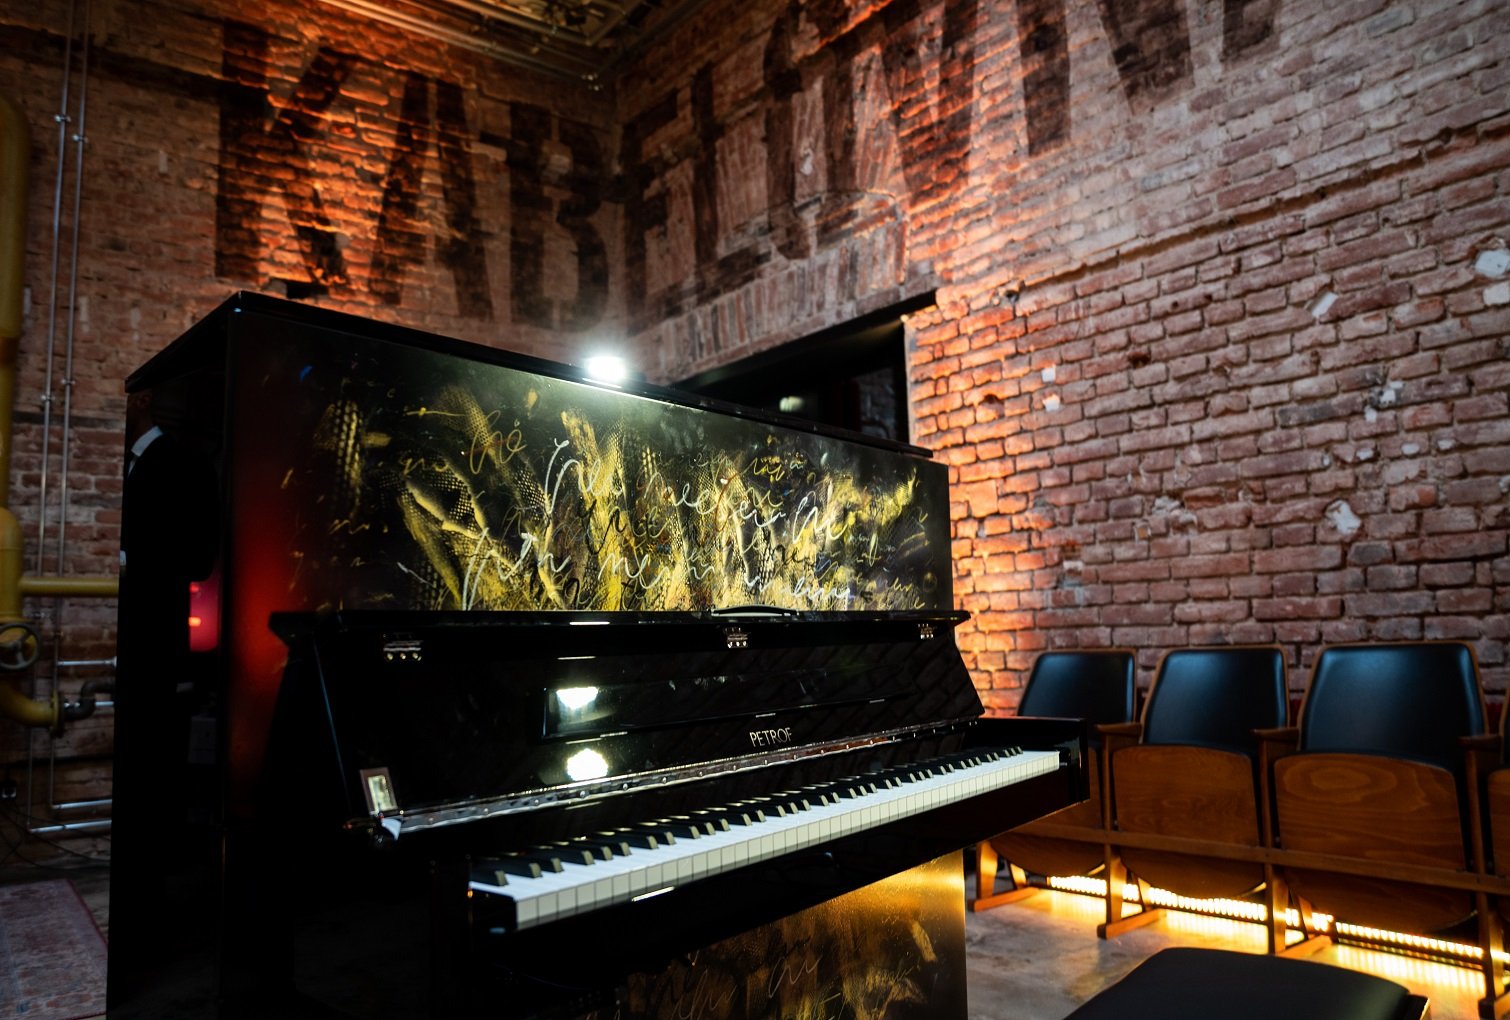 PETROF Gemini: A high-end upright piano with an epoch-making design